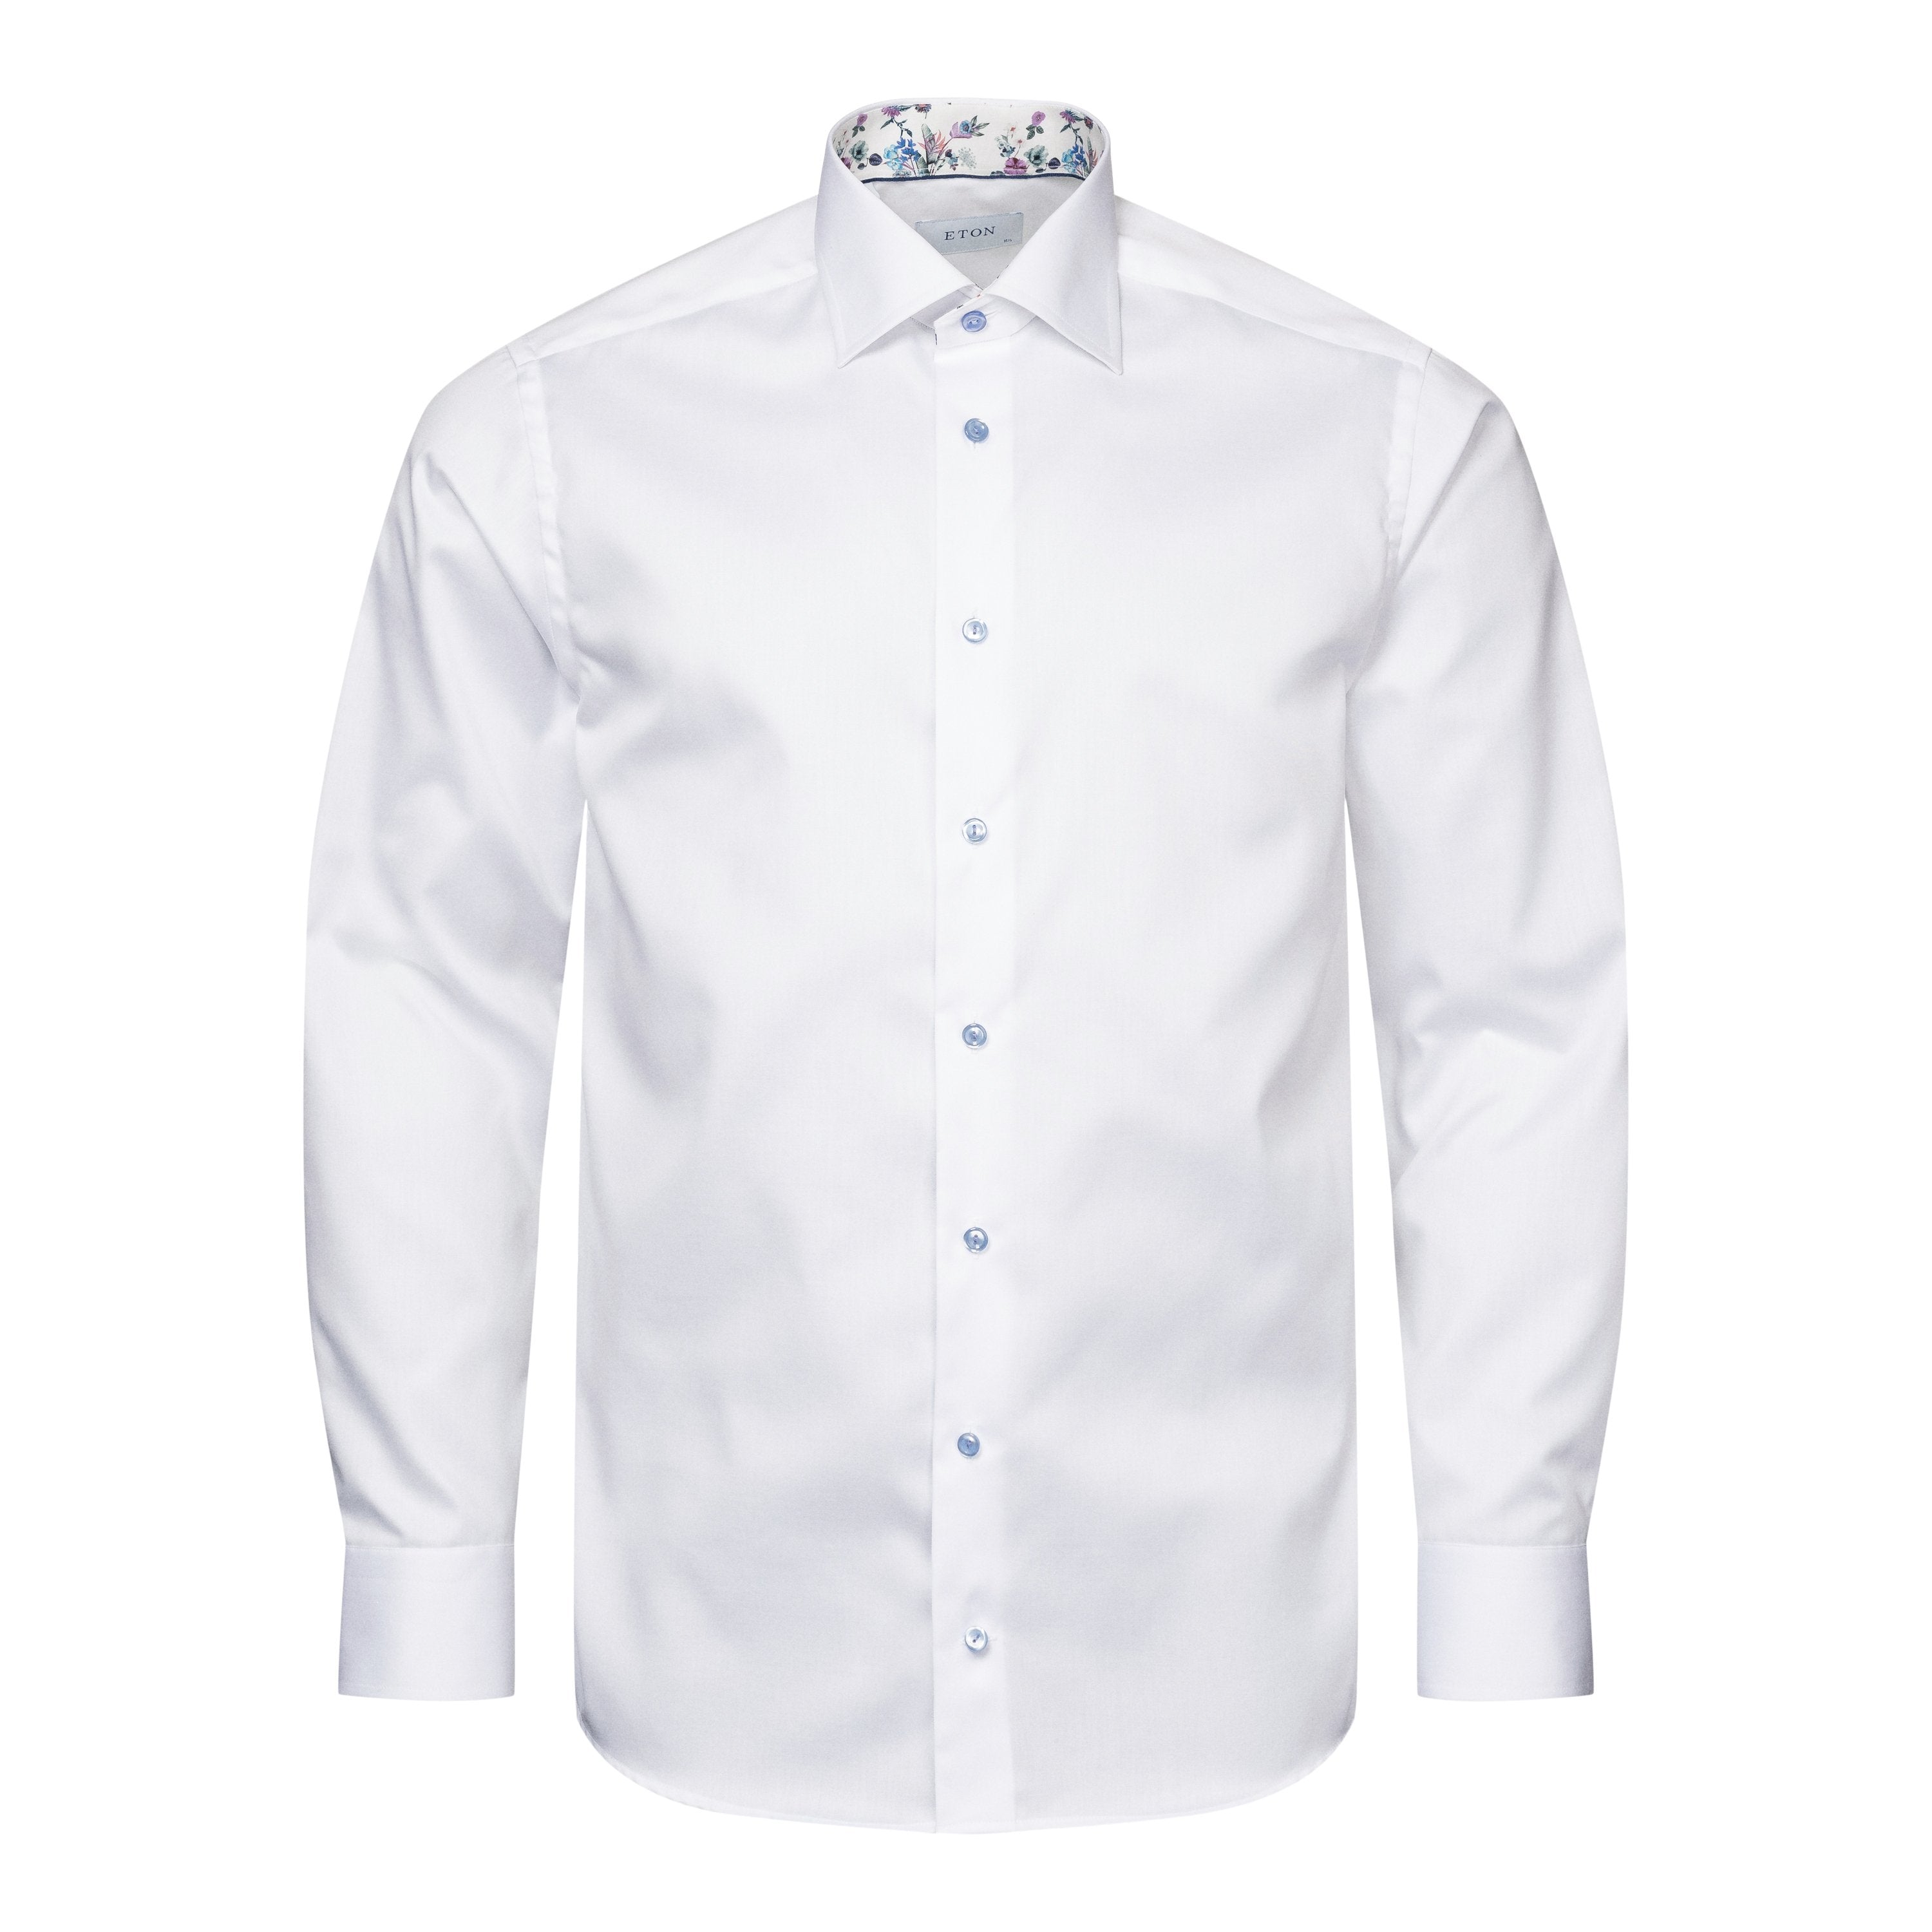 ETON - White CONTEMPORARY FIT Signature Twill Shirt - Floral Contrast Details 10001168300